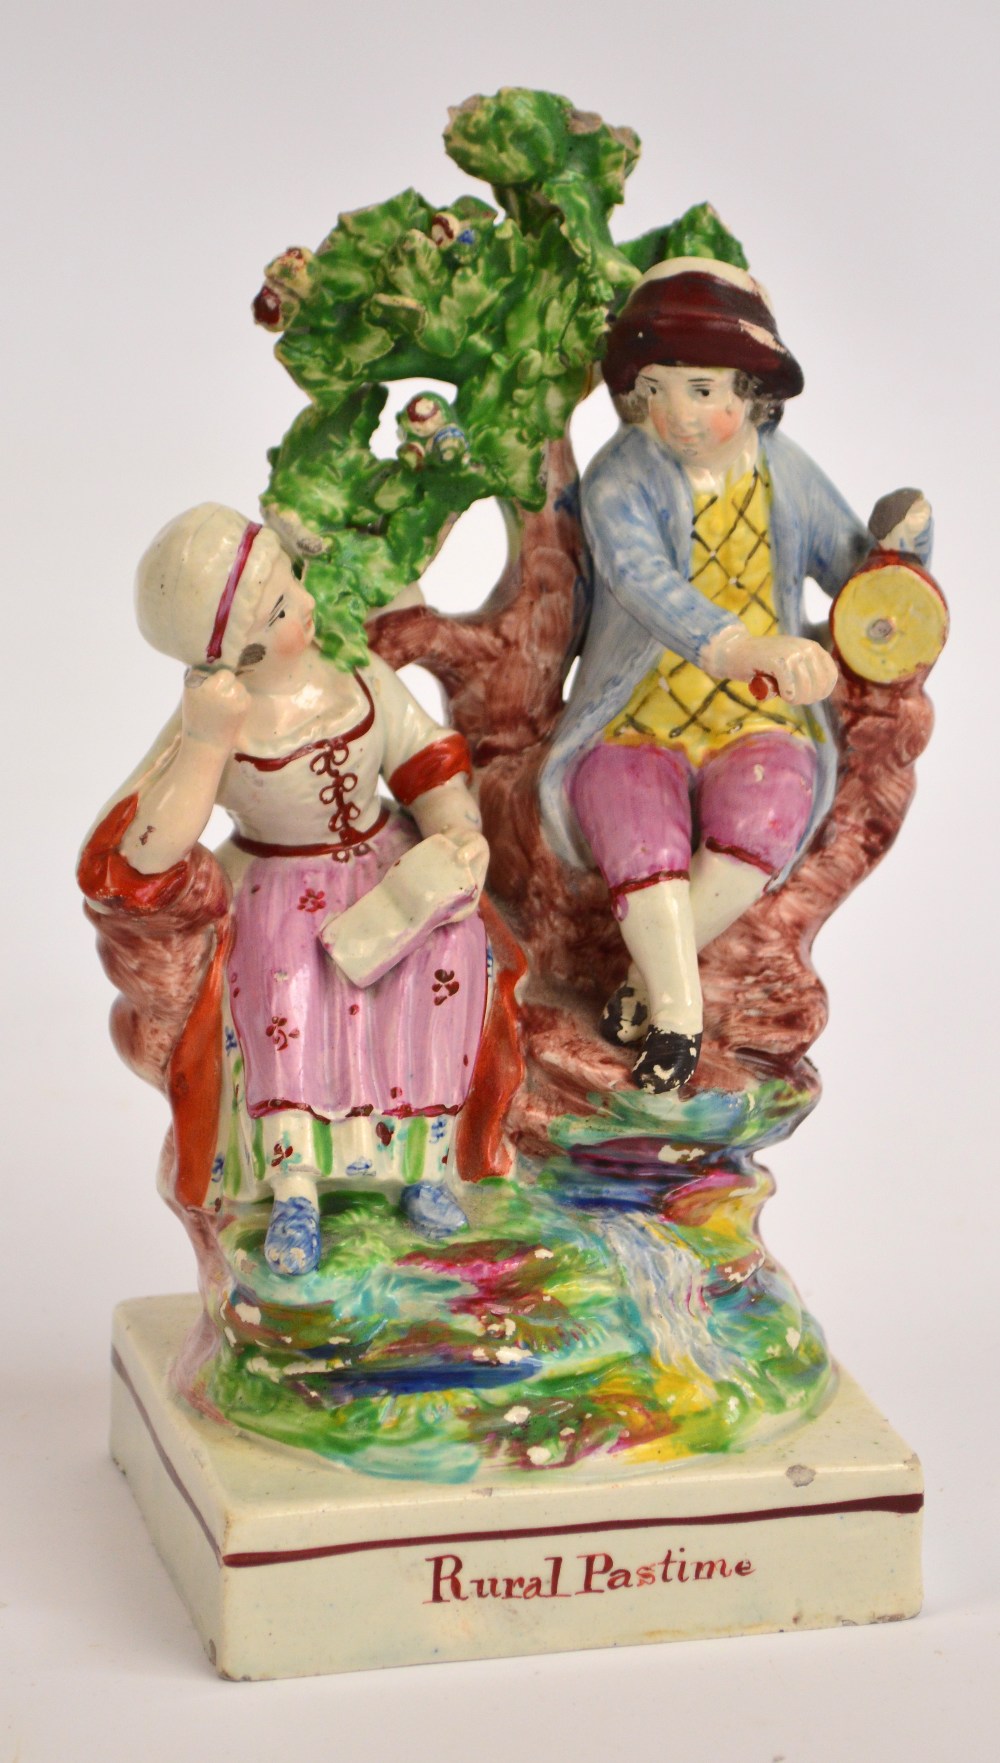 An early to mid 19th century Staffordshire figure of a girl and boy seated on a tree inscribed "